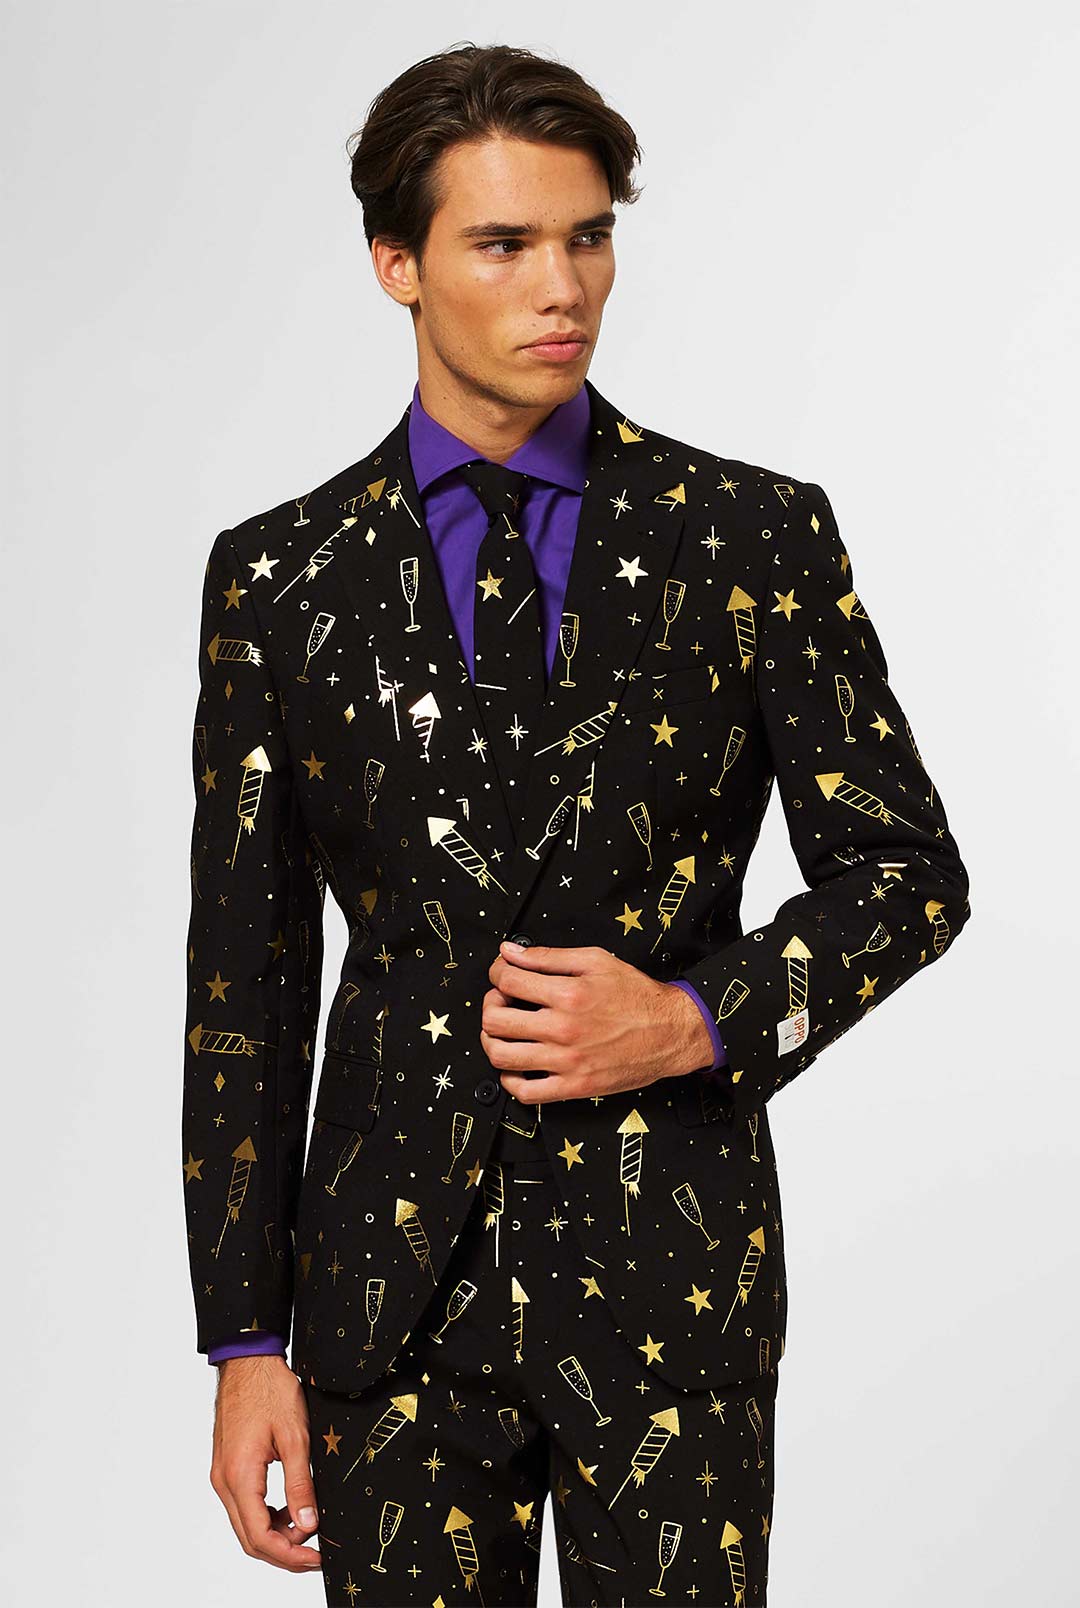 Fancy Fireworks, New Year's Eve Suit